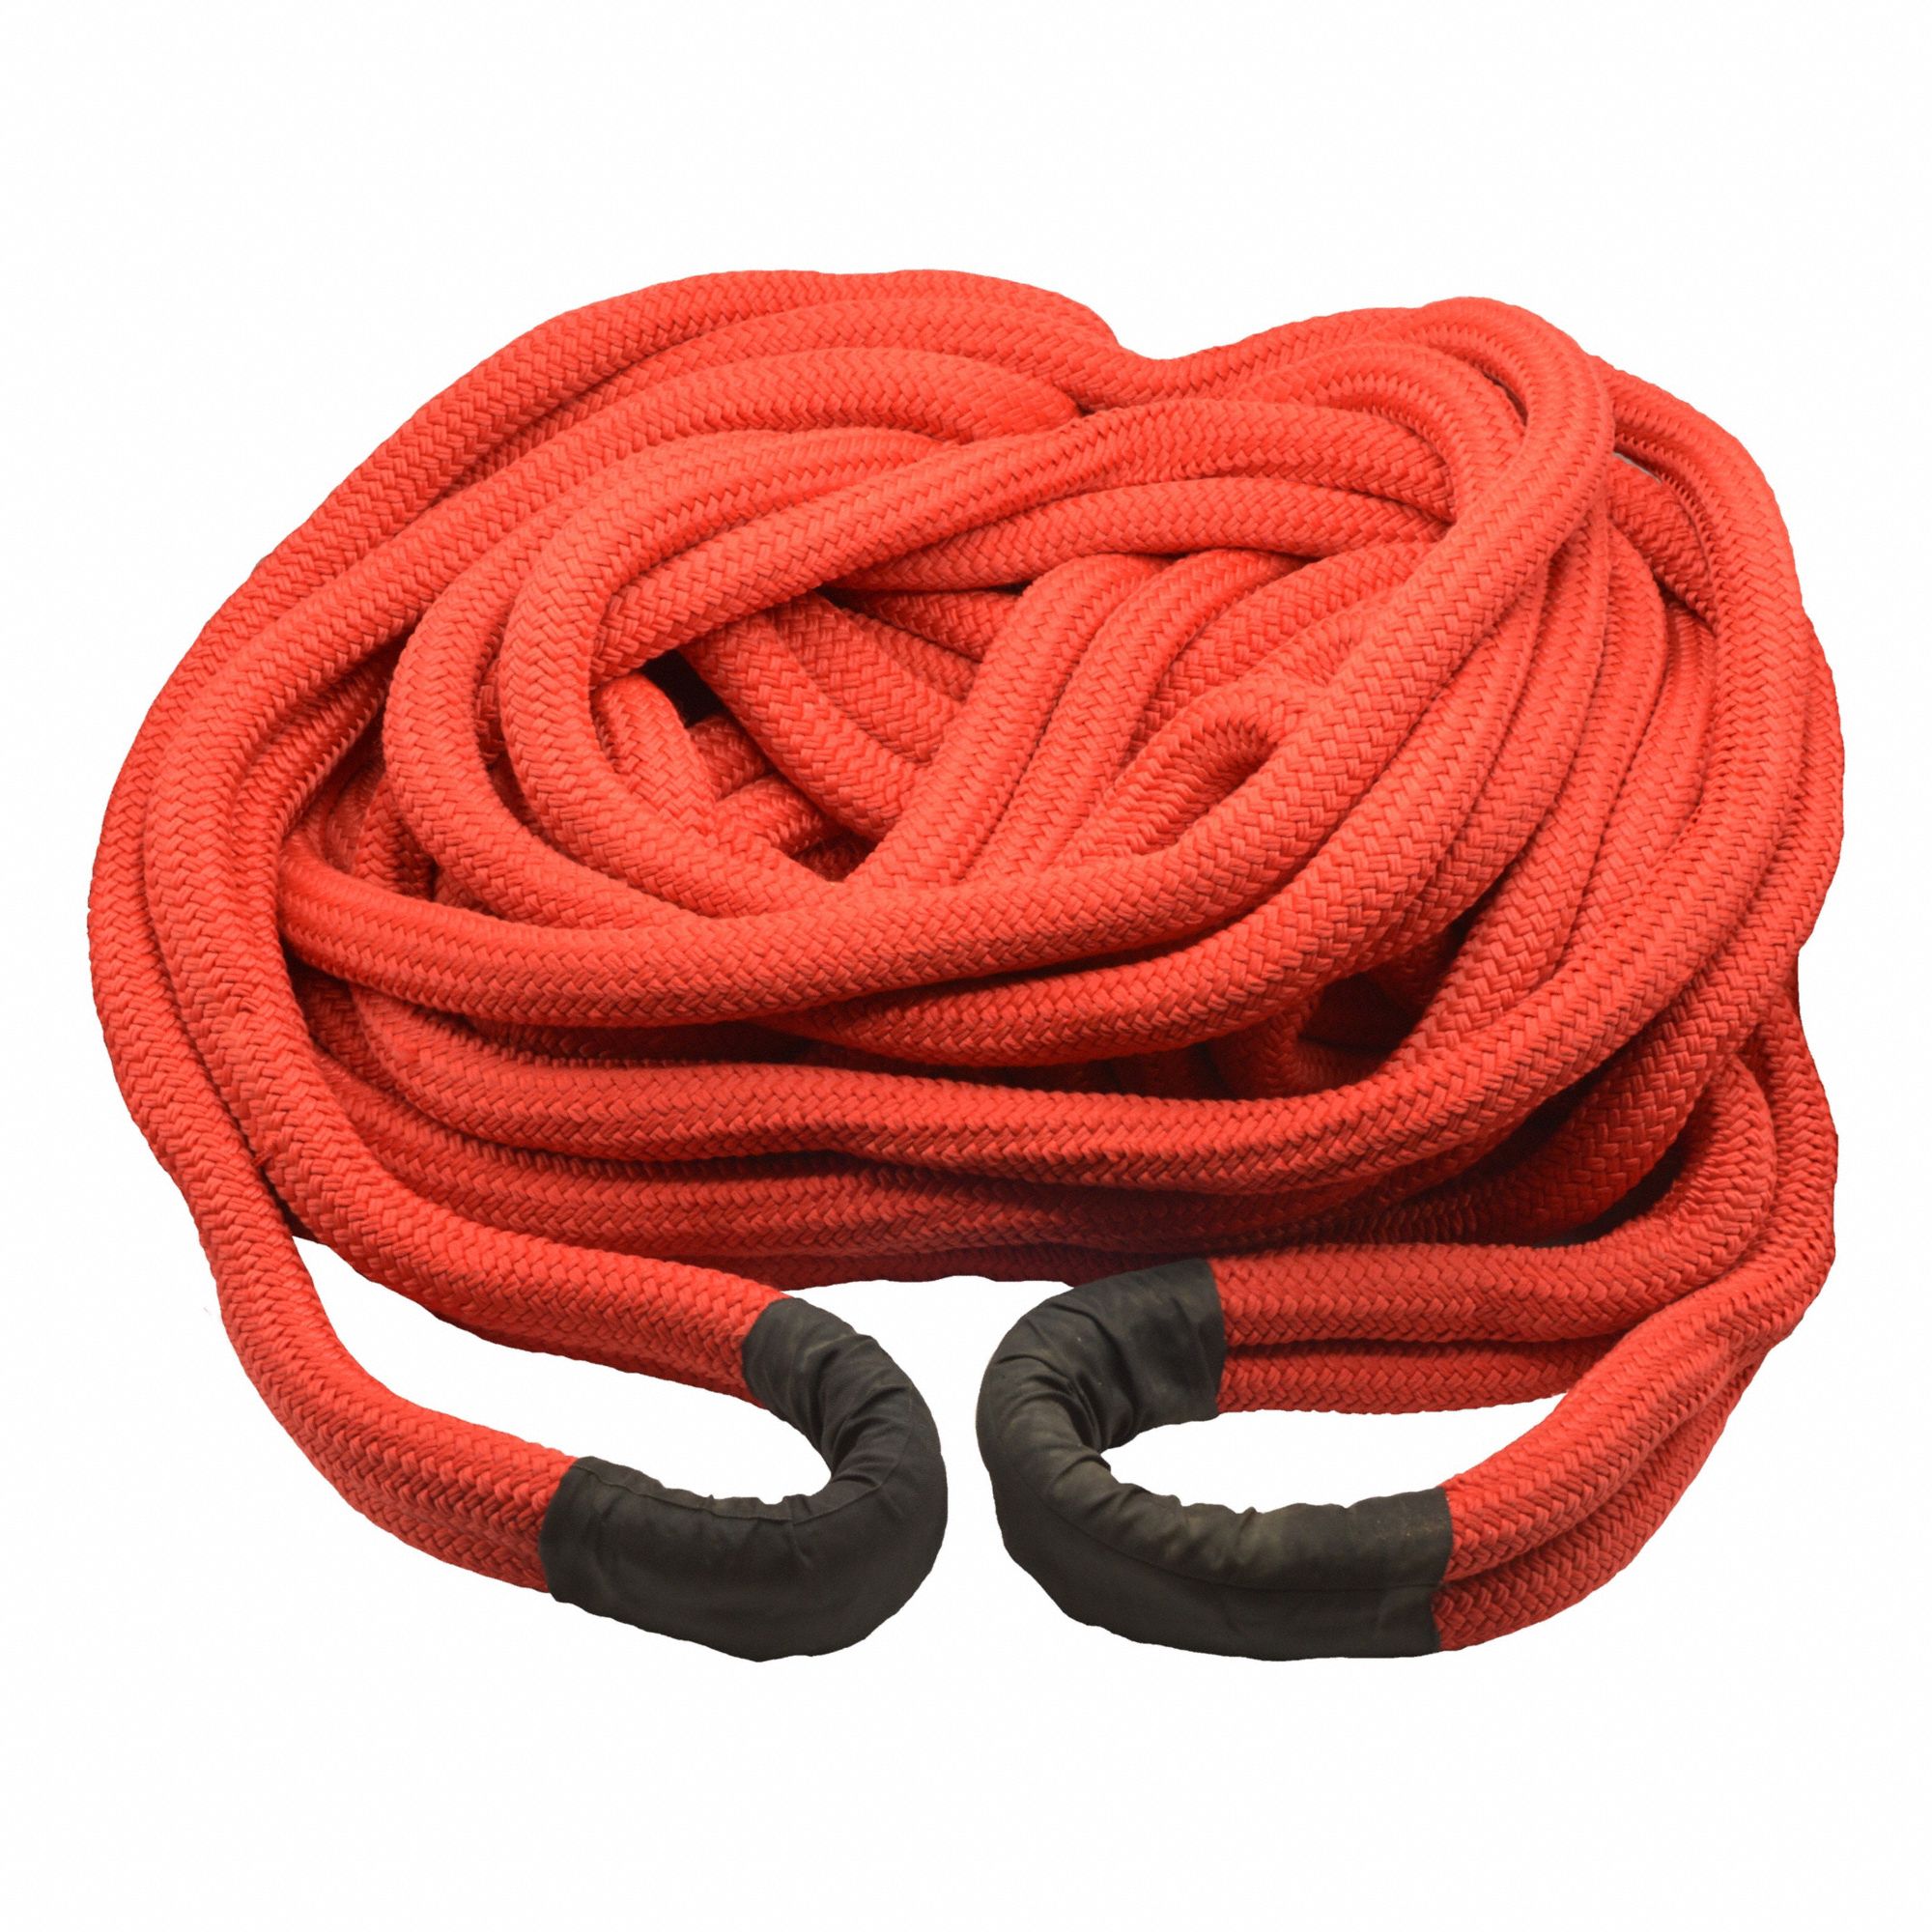 Recovery Rope: 20 ft Lg, 1 in Dia, Nylon, Loop, Nylon, Red, Includes Storage Bag